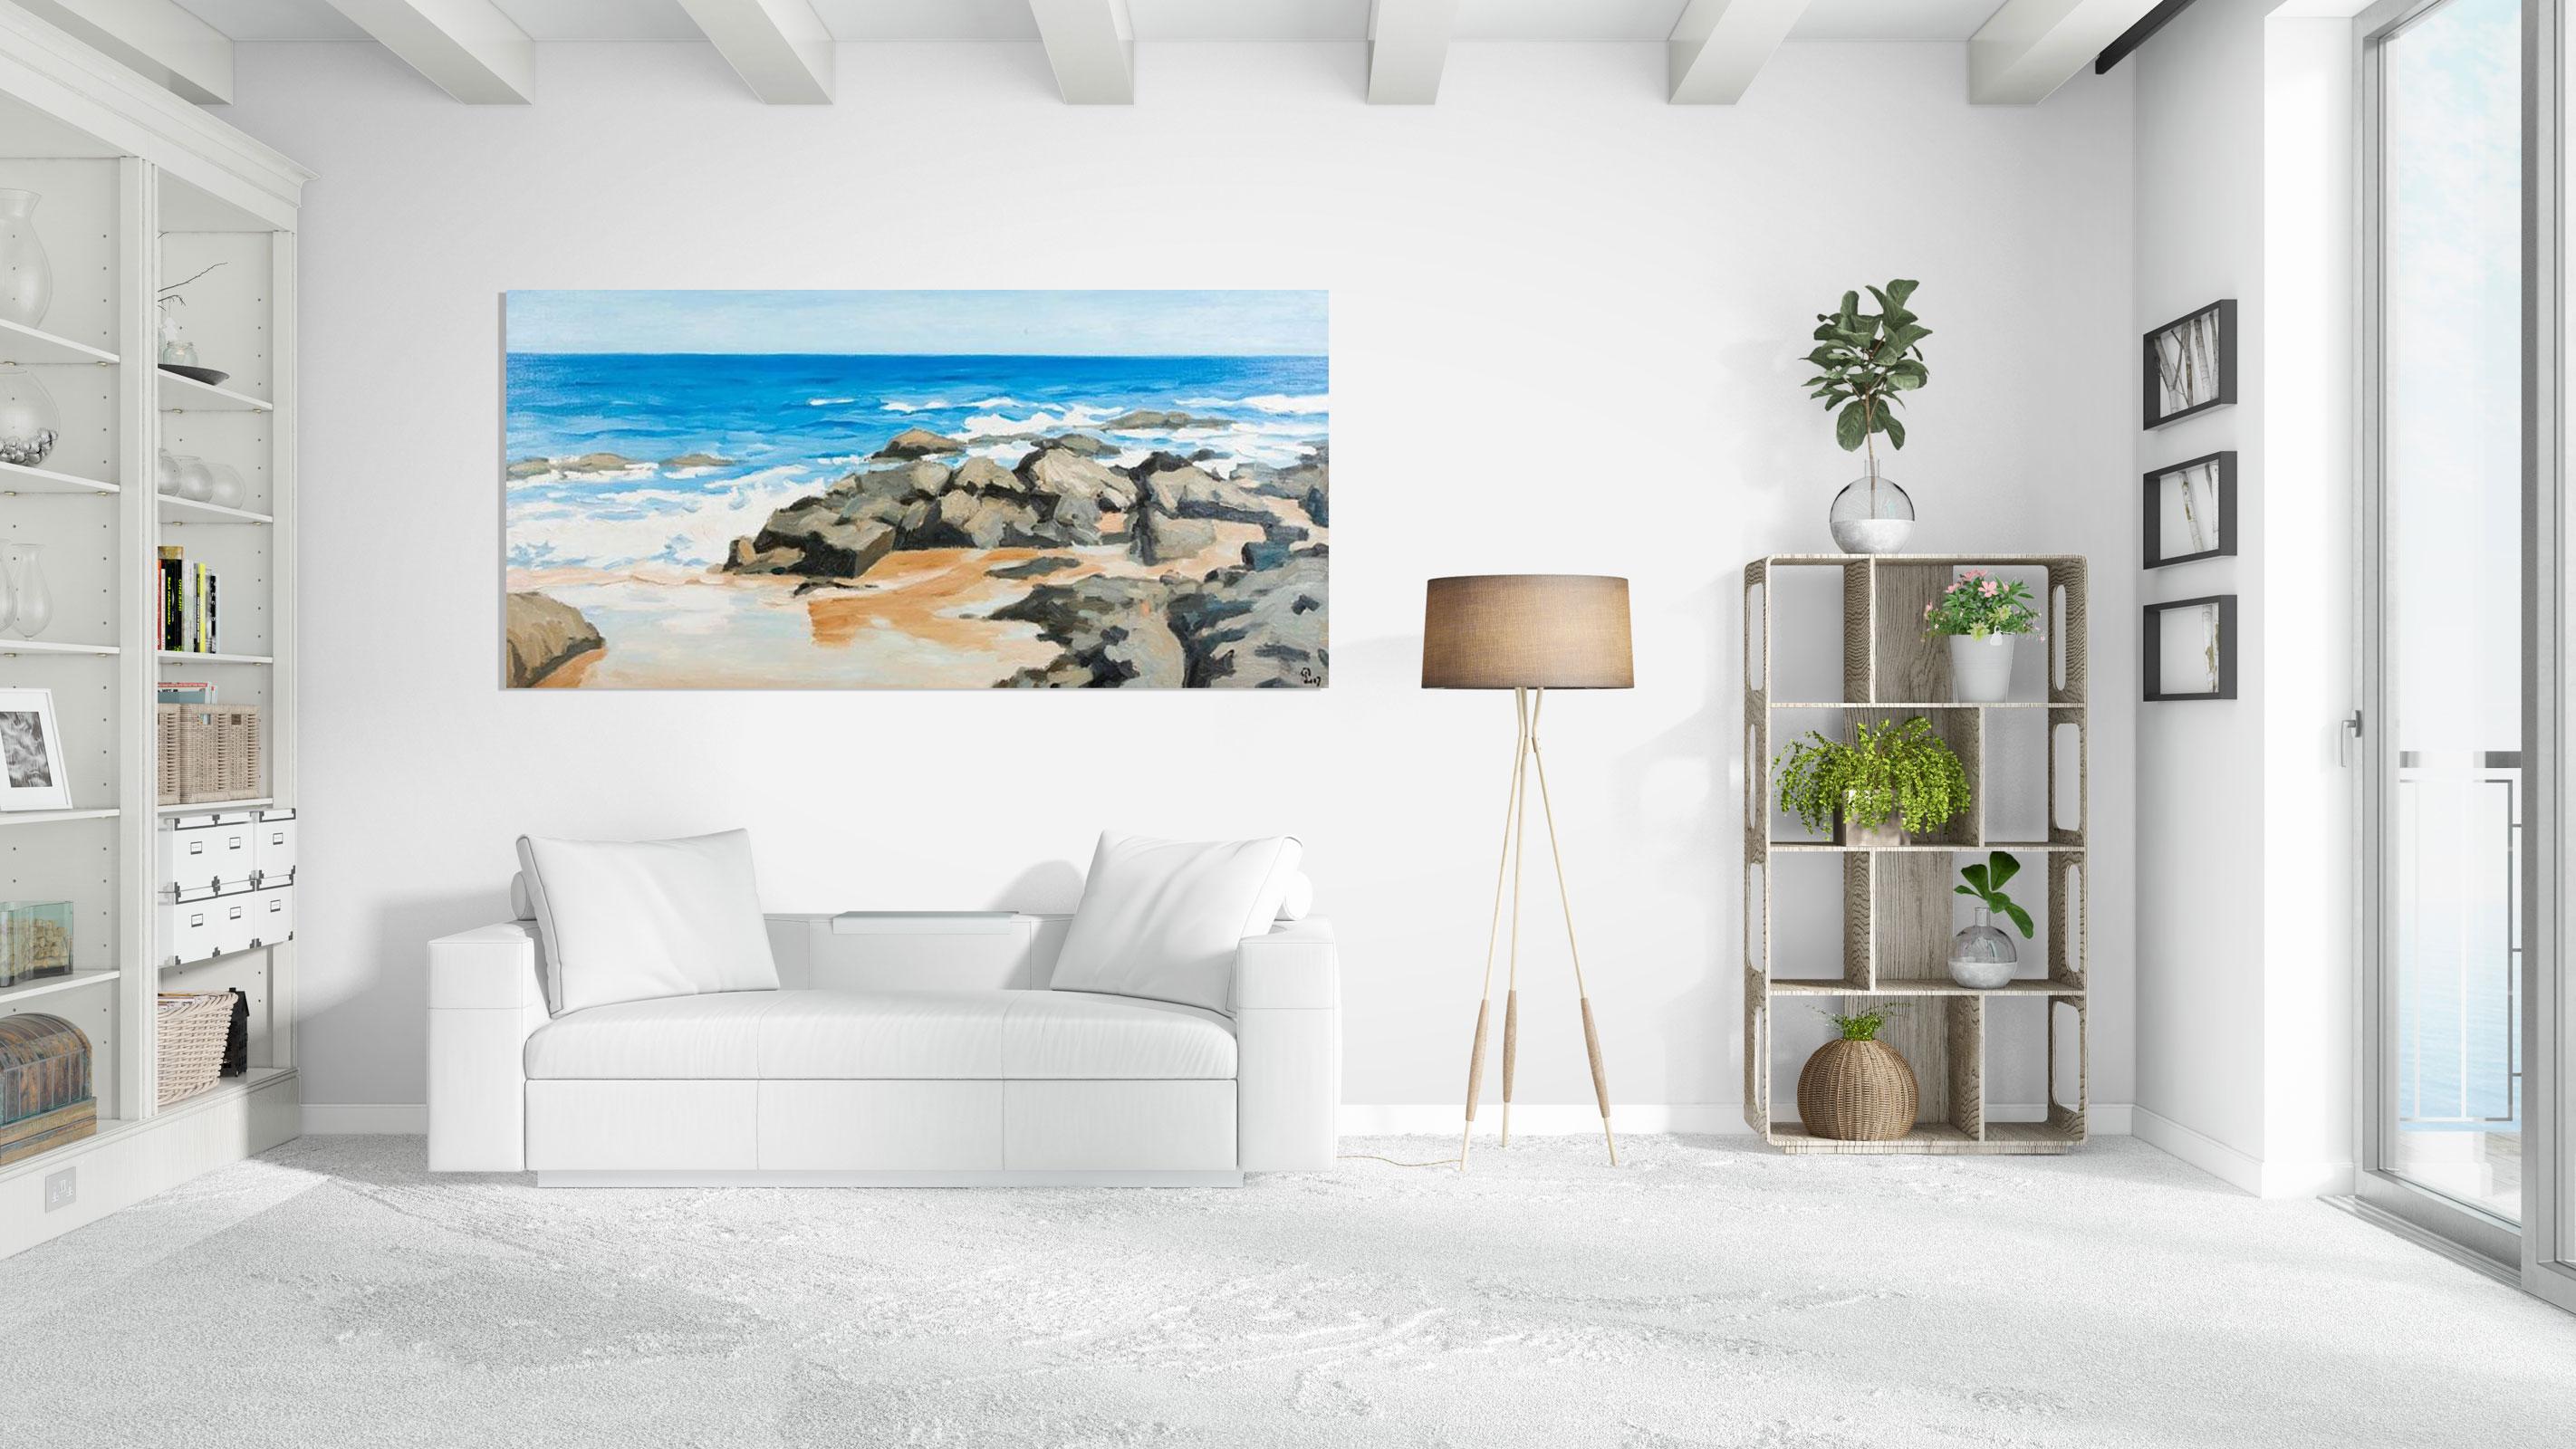 ‘Saui Son Beach’ is a large oil on canvas Impressionist seascape painting of horizontal format, created by Vietnamese artist Pham Luan in 2008. Featuring a palette made of blue, grey, brown and white tones, the painting depicts a mesmerizing